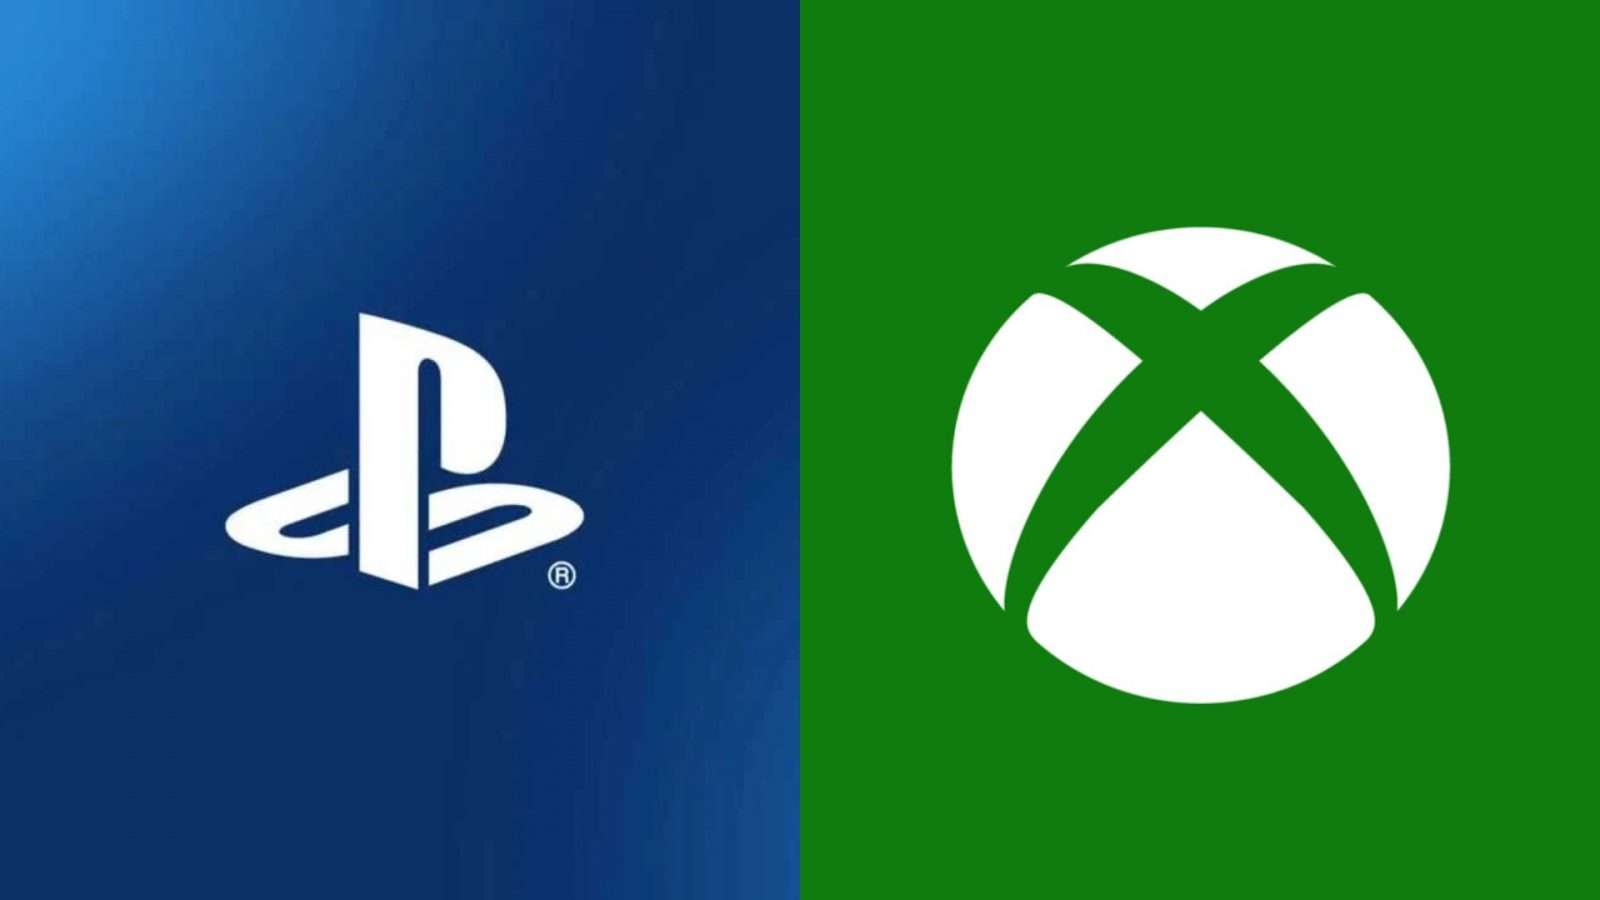 Sony has reportedly ceased talks with Activision amid Microsoft merger